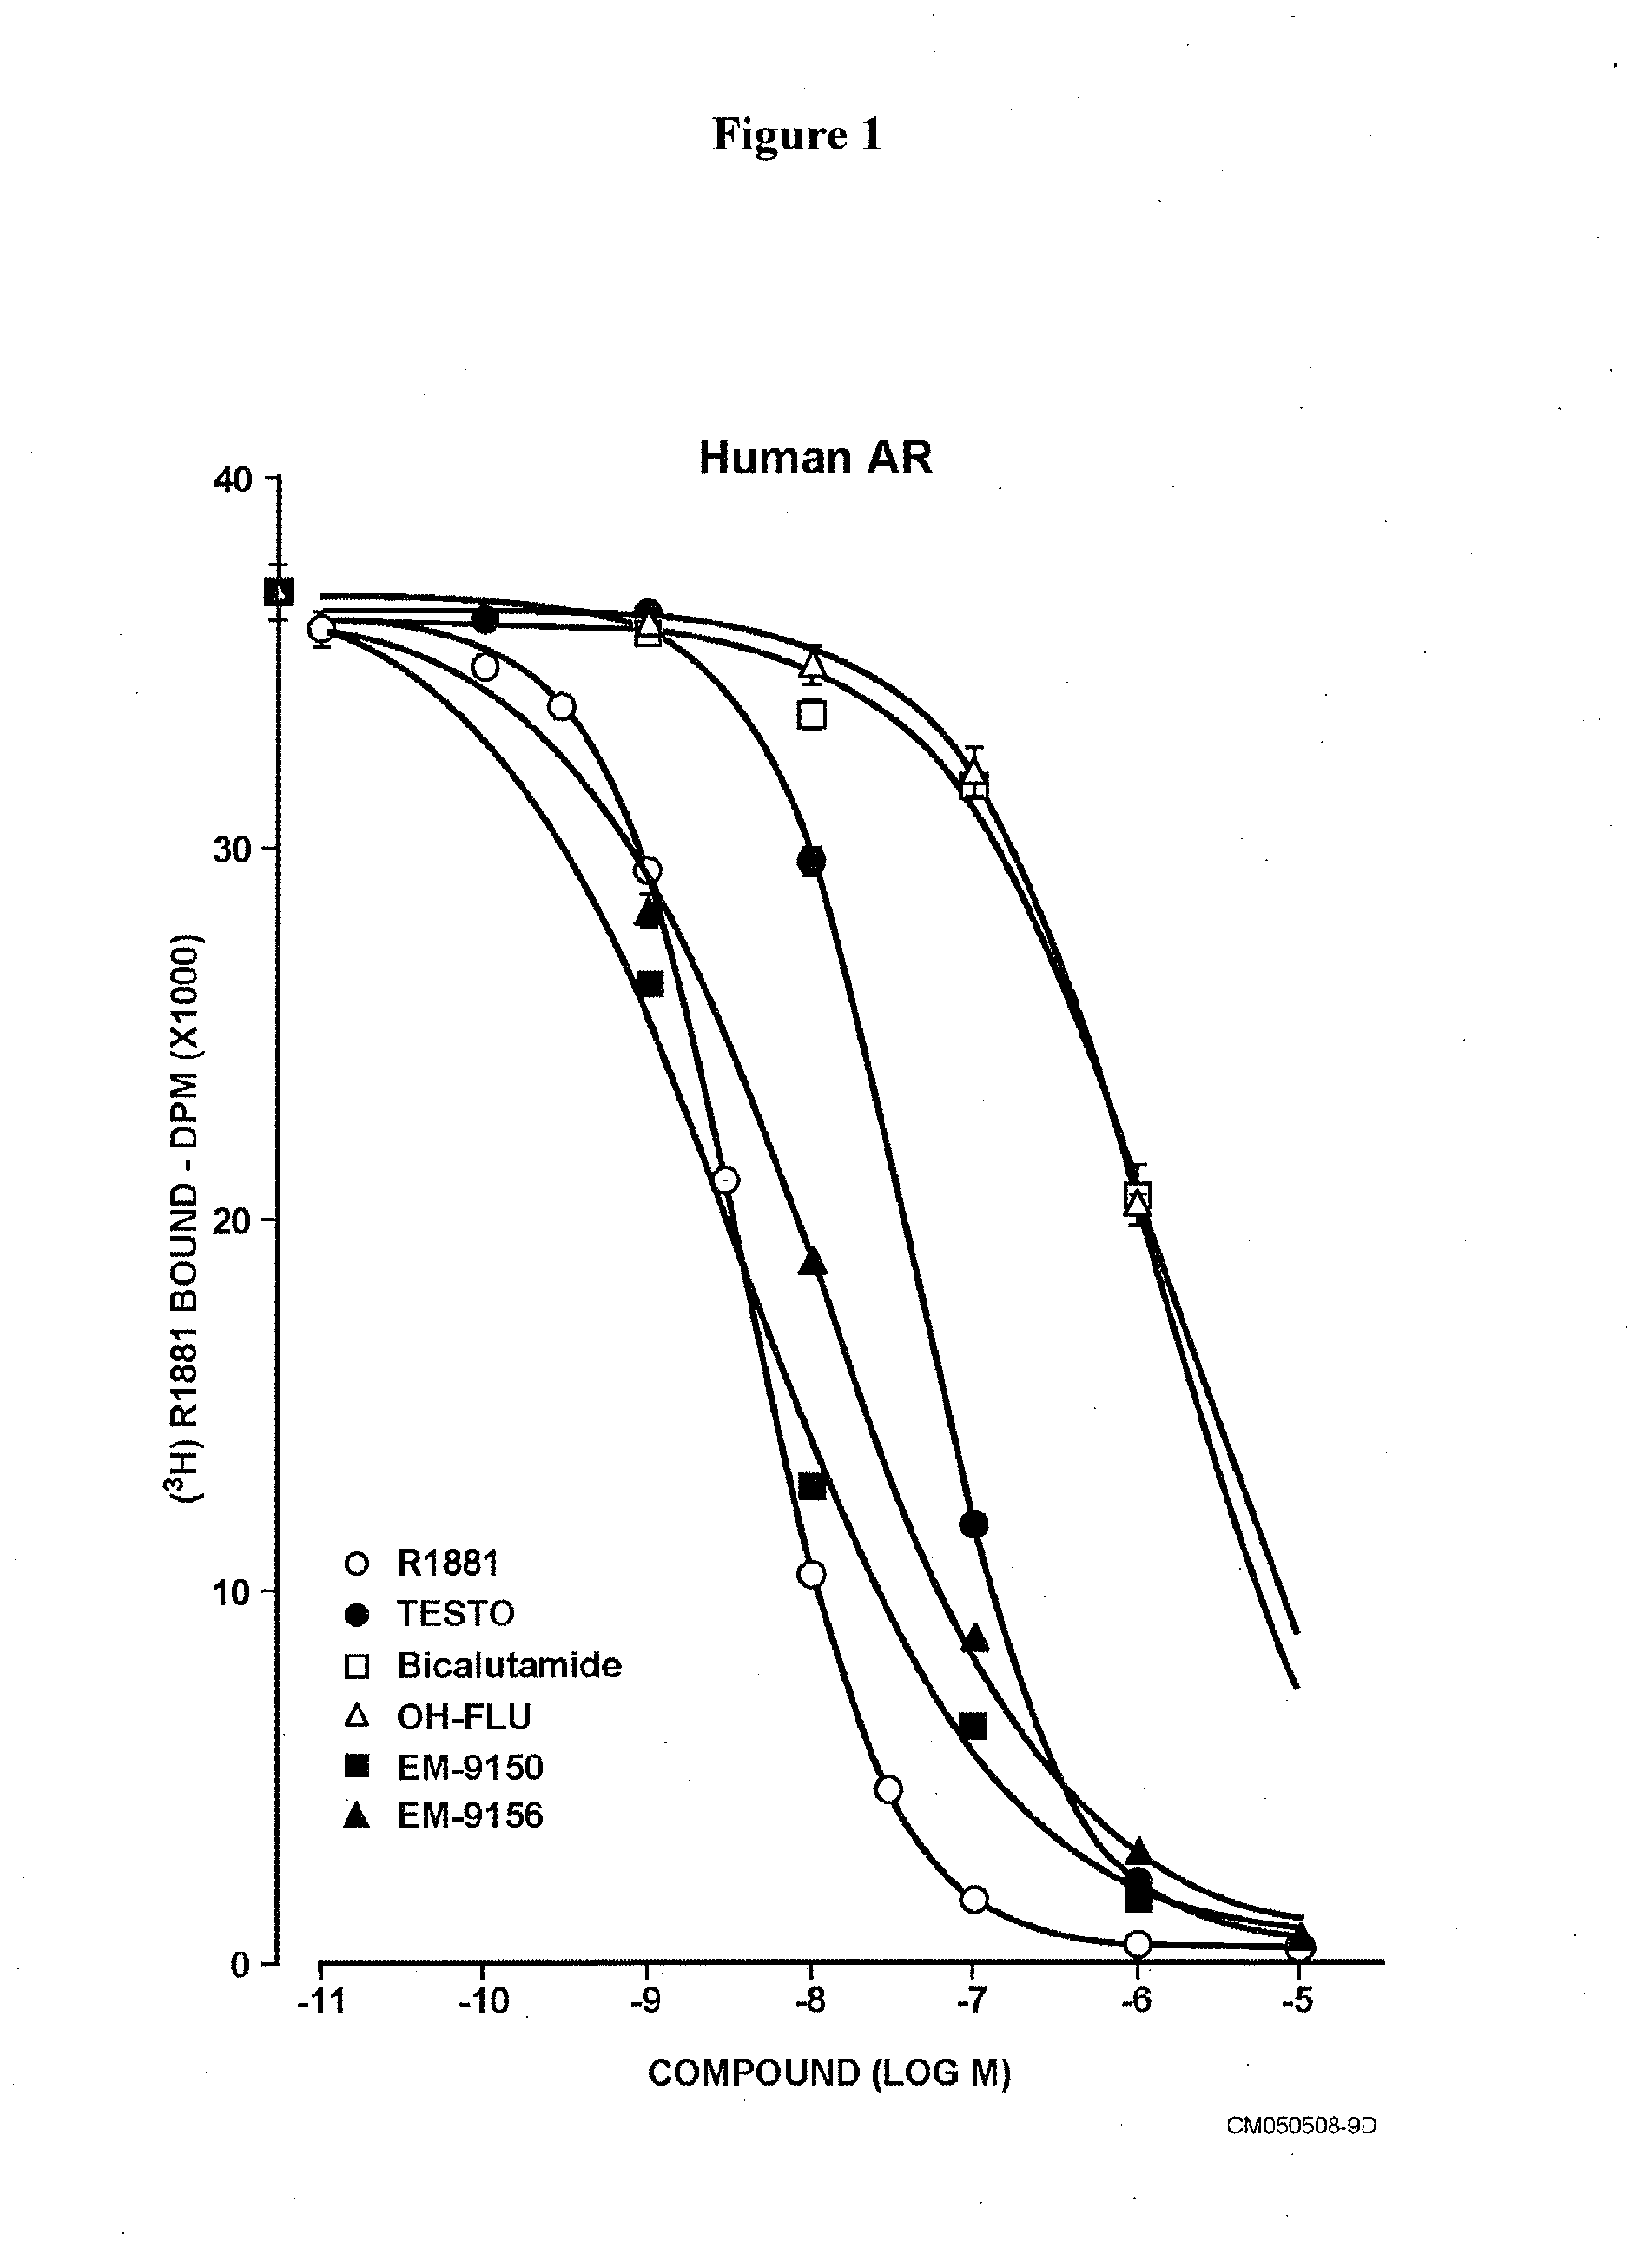 Non-steroidal antiandrogens and selective androgen receptor modulators with a pyridyl moiety